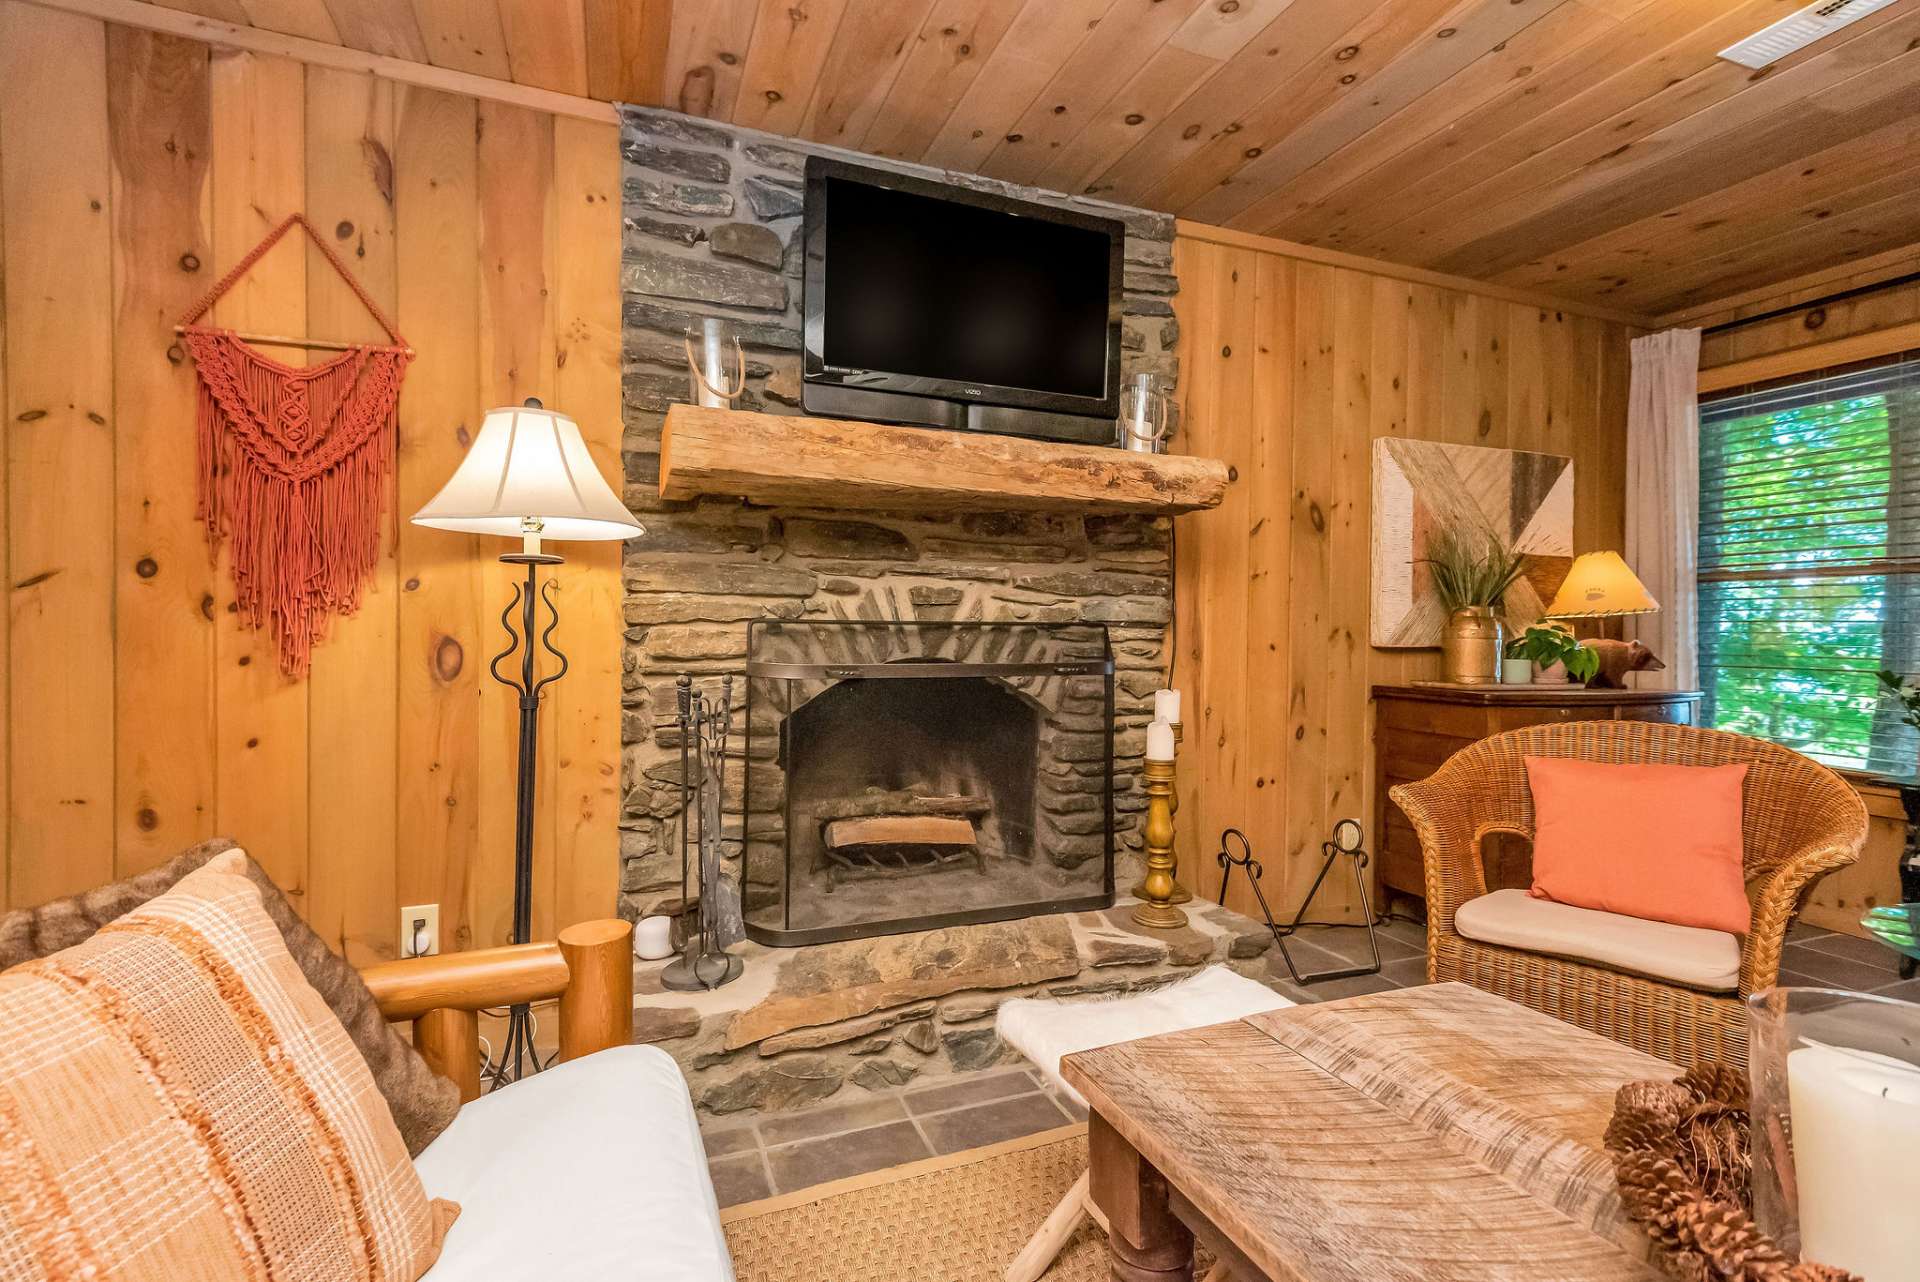 A second stone wood burning fireplace will knock off the chill and set the mood.